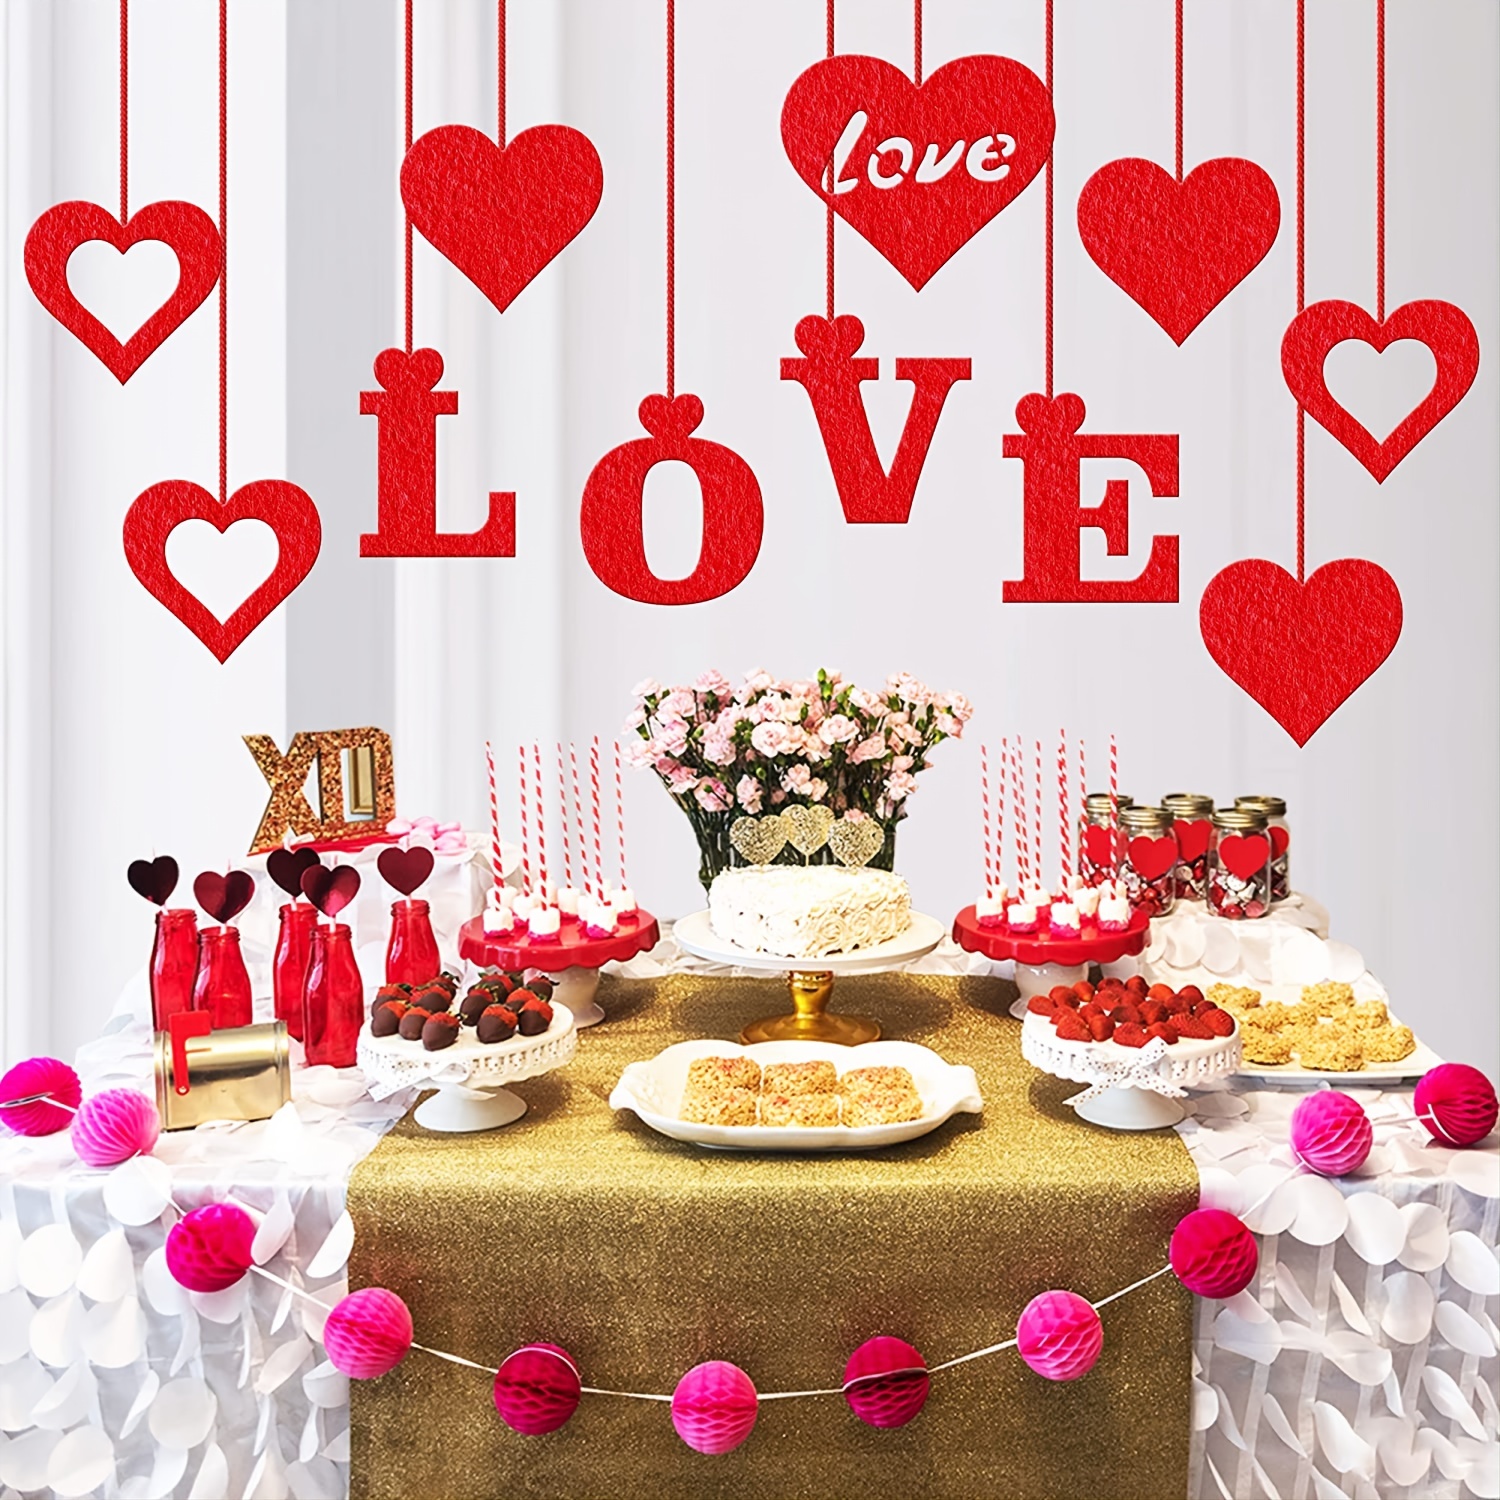 Outfmvch Valentines Day Decorations Valentines Decor Valentines Day  Decorations For Office Outdoor Valentines Decorations Valentines Day Decor